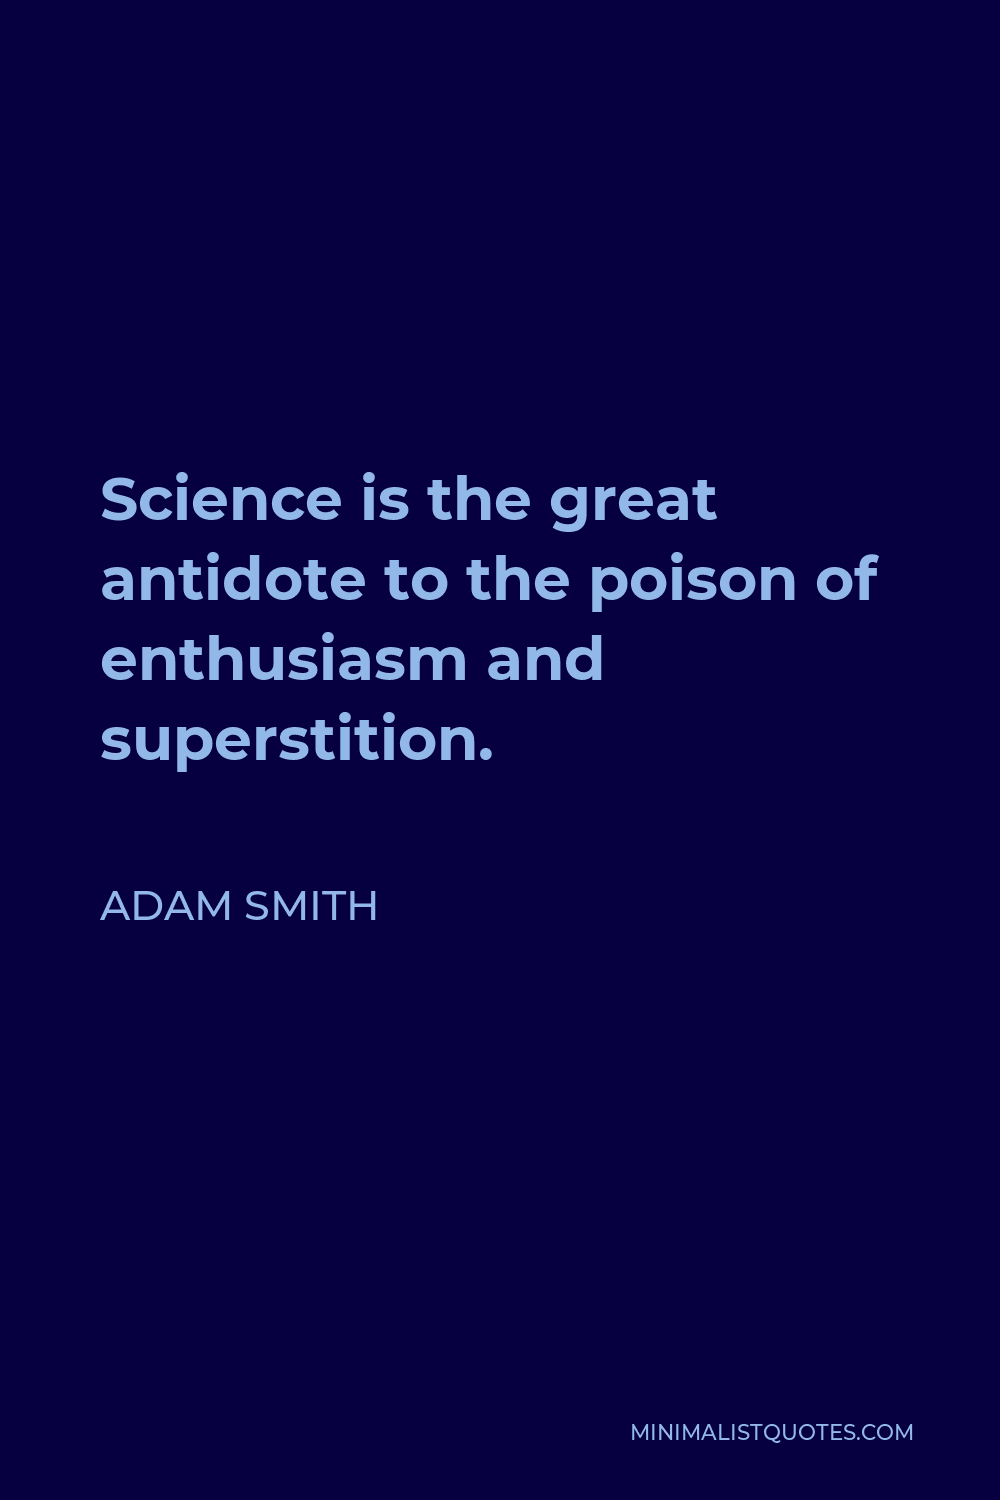 Adam Smith Quote - Science is the great antidote to the poison of enthusiasm and superstition.